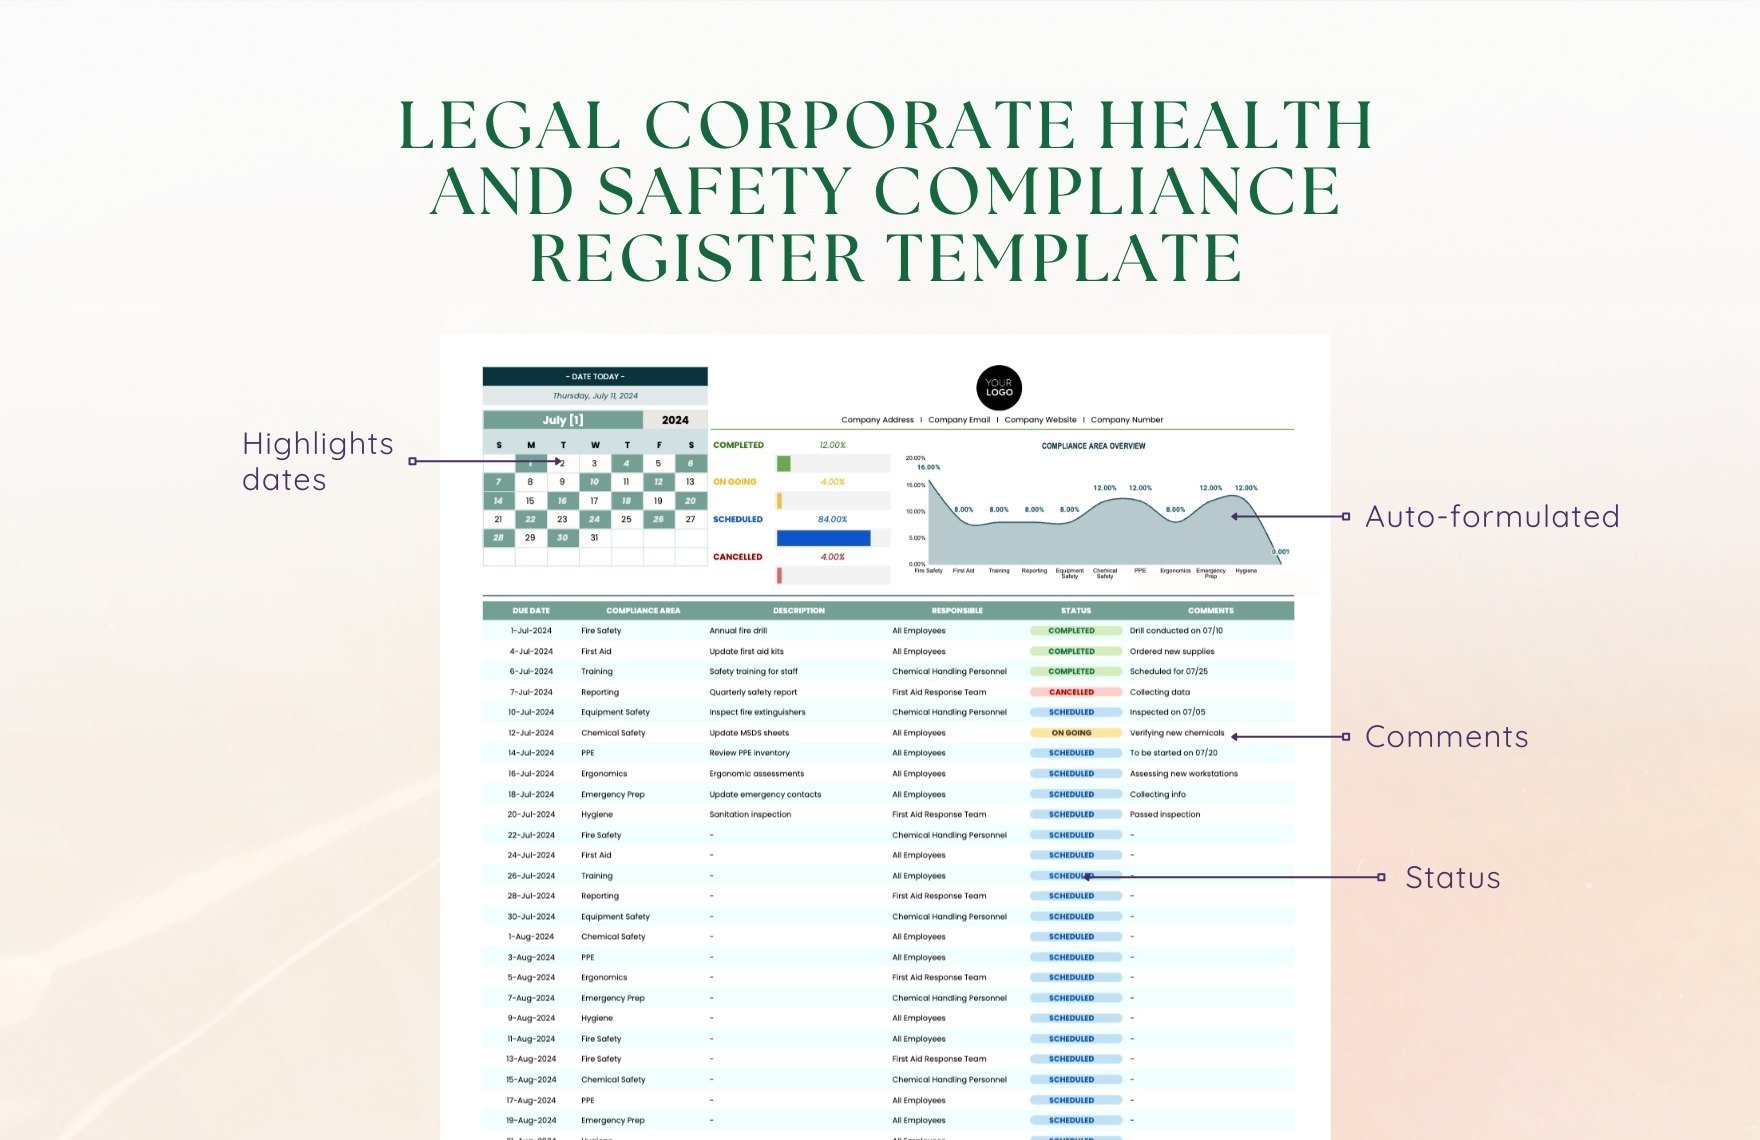 Legal Corporate Health and Safety Compliance Register Template